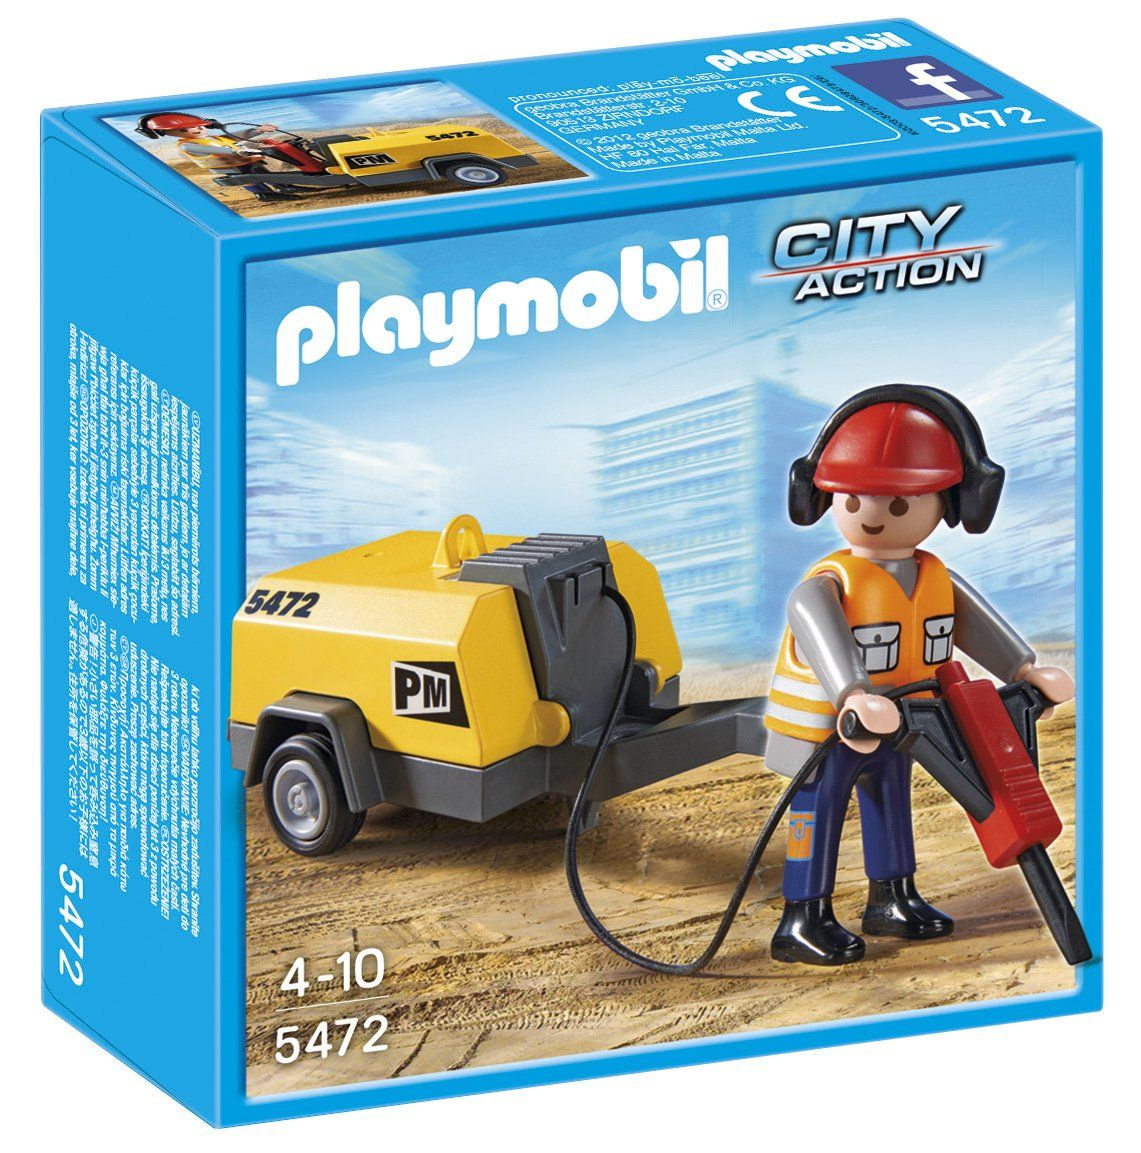 Playmobil City Action 5472 Construction Worker With Jack Hammer: Amazon avec Tractopelle Playmobil 